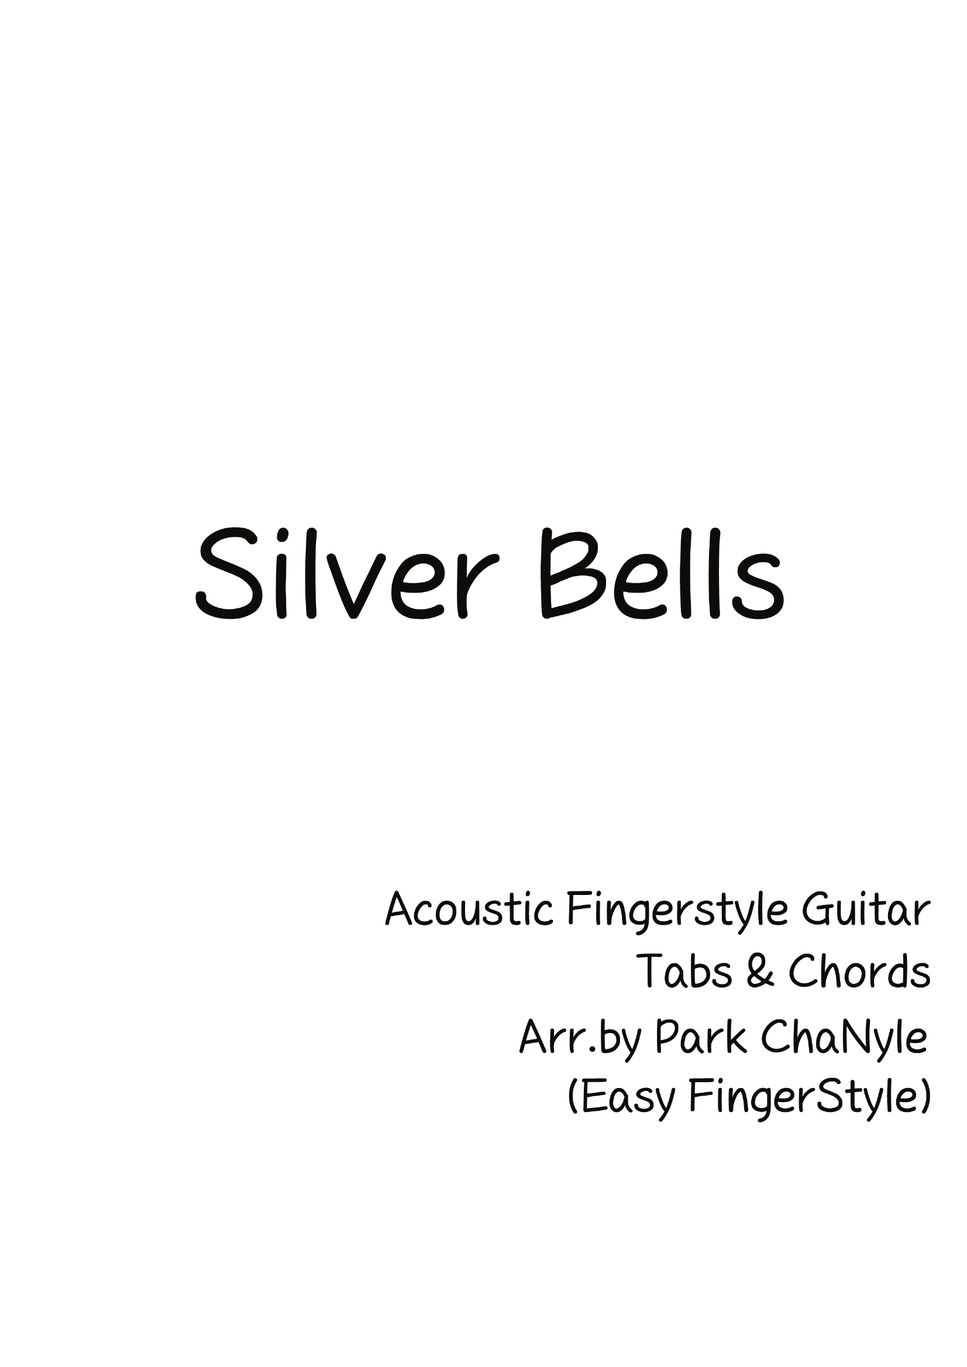 Jay Livingston - Silver Bells (Acoustic Fingerstyle Guitar) by Park ChaNyle